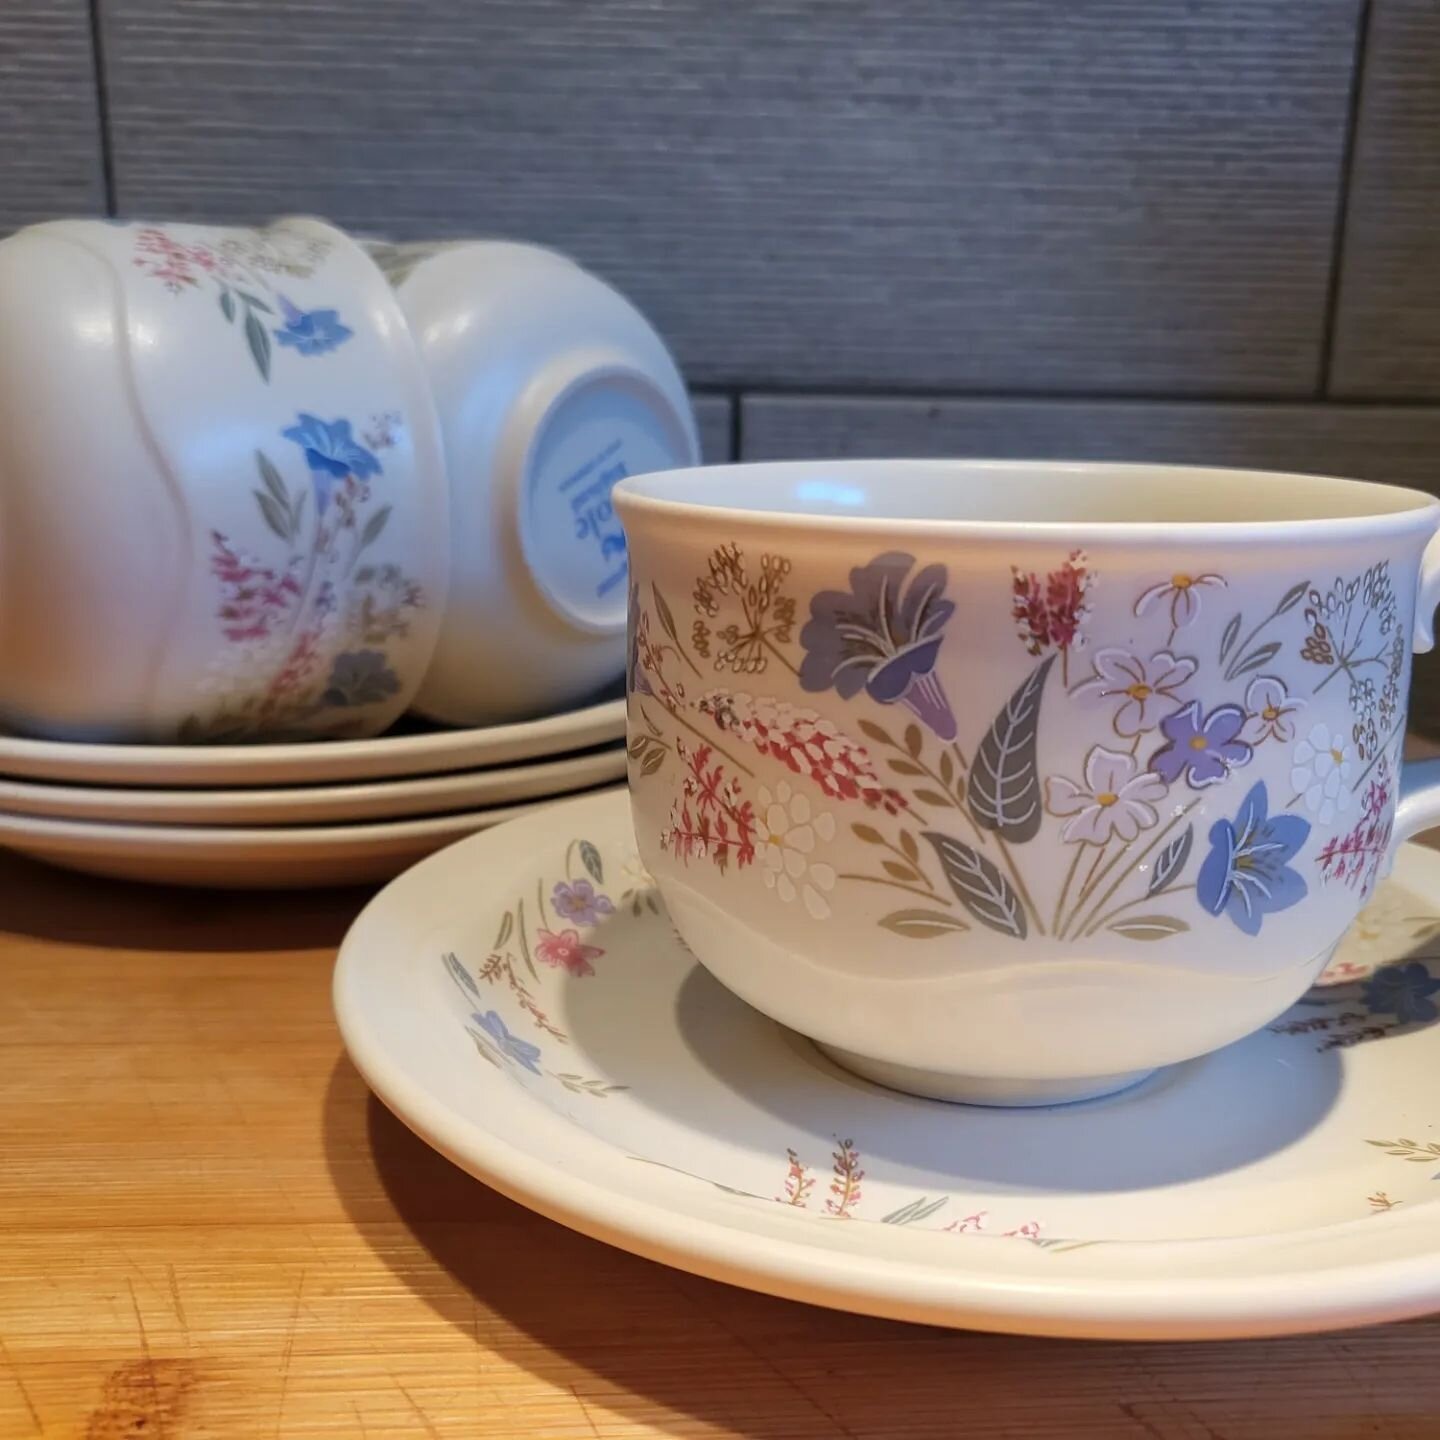 I am loving these charity shop finds, had to get two sets as there was only 4 in the first pattern even though I absolutely LOVE the little flower patterns!! 

#teacereony #cacaoceremony #bargains #charityshopfinds #ForestBathing #SilvaPsychotherapy 